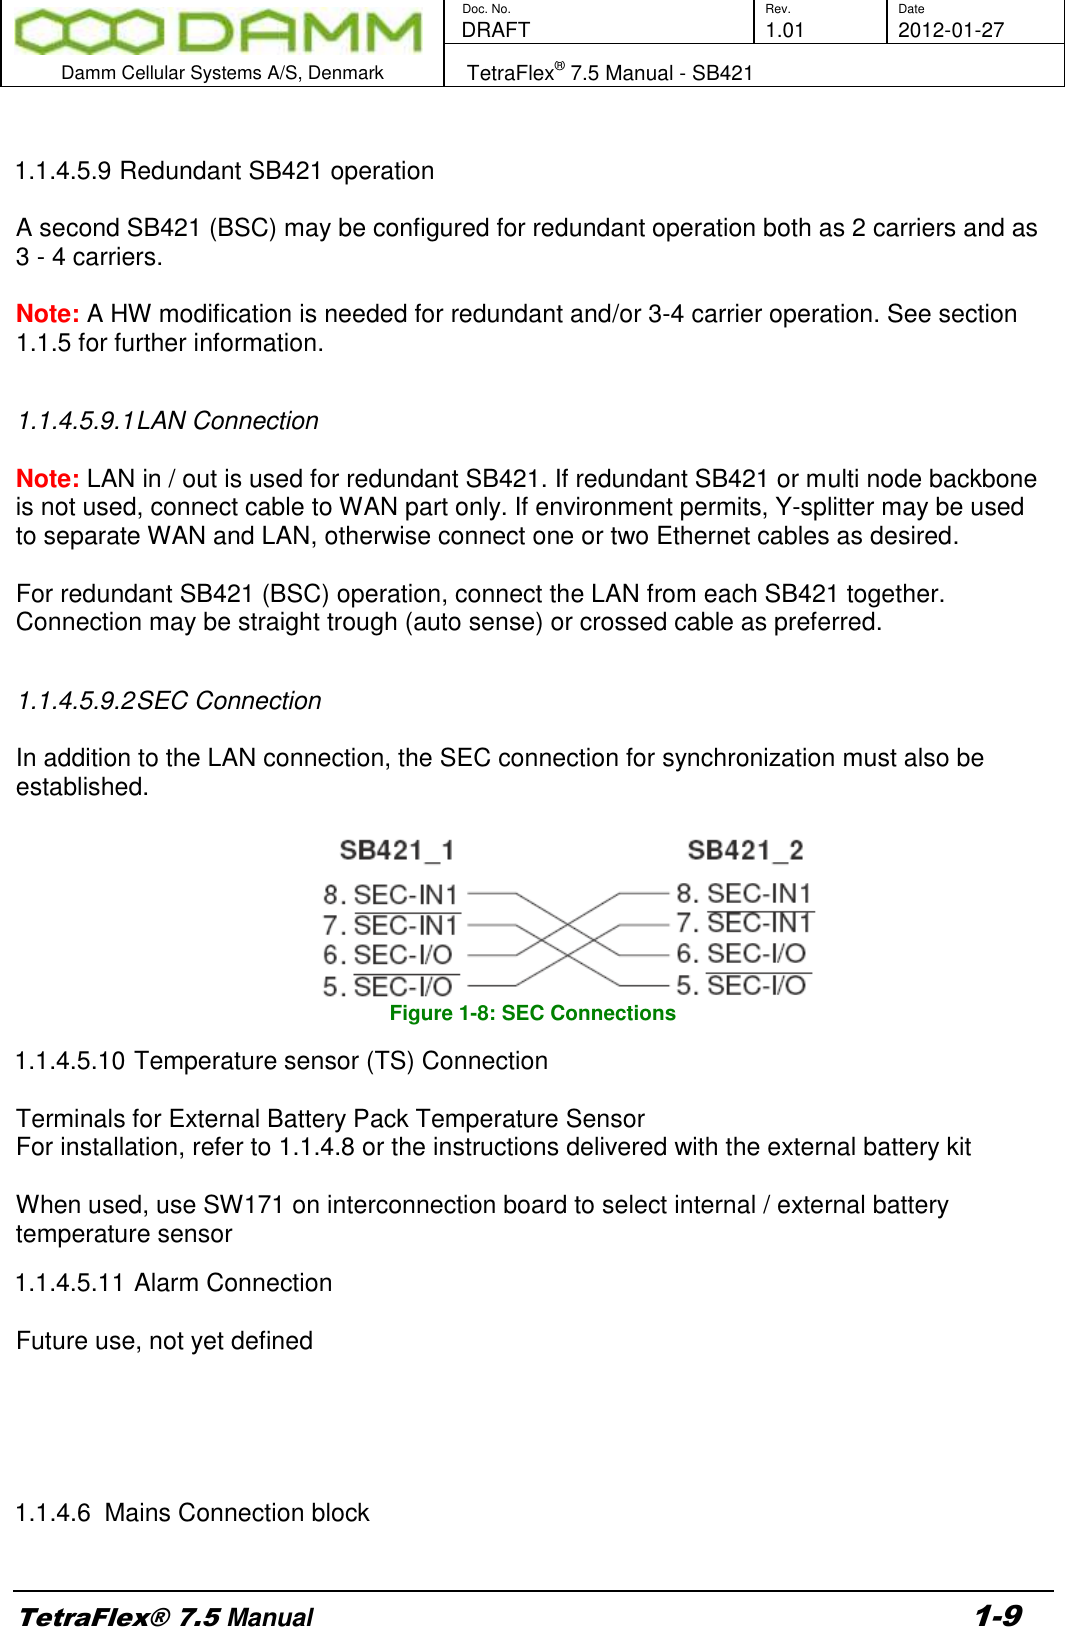        Doc. No. Rev. Date    DRAFT  1.01 2012-01-27  Damm Cellular Systems A/S, Denmark   TetraFlex® 7.5 Manual - SB421  TetraFlex® 7.5 Manual 1-9  1.1.4.5.9 Redundant SB421 operation  A second SB421 (BSC) may be configured for redundant operation both as 2 carriers and as 3 - 4 carriers.  Note: A HW modification is needed for redundant and/or 3-4 carrier operation. See section 1.1.5 for further information.  1.1.4.5.9.1 LAN Connection  Note: LAN in / out is used for redundant SB421. If redundant SB421 or multi node backbone is not used, connect cable to WAN part only. If environment permits, Y-splitter may be used to separate WAN and LAN, otherwise connect one or two Ethernet cables as desired.  For redundant SB421 (BSC) operation, connect the LAN from each SB421 together. Connection may be straight trough (auto sense) or crossed cable as preferred.  1.1.4.5.9.2 SEC Connection  In addition to the LAN connection, the SEC connection for synchronization must also be established.    Figure 1-8: SEC Connections 1.1.4.5.10 Temperature sensor (TS) Connection  Terminals for External Battery Pack Temperature Sensor For installation, refer to 1.1.4.8 or the instructions delivered with the external battery kit    When used, use SW171 on interconnection board to select internal / external battery temperature sensor 1.1.4.5.11 Alarm Connection  Future use, not yet defined            1.1.4.6  Mains Connection block  